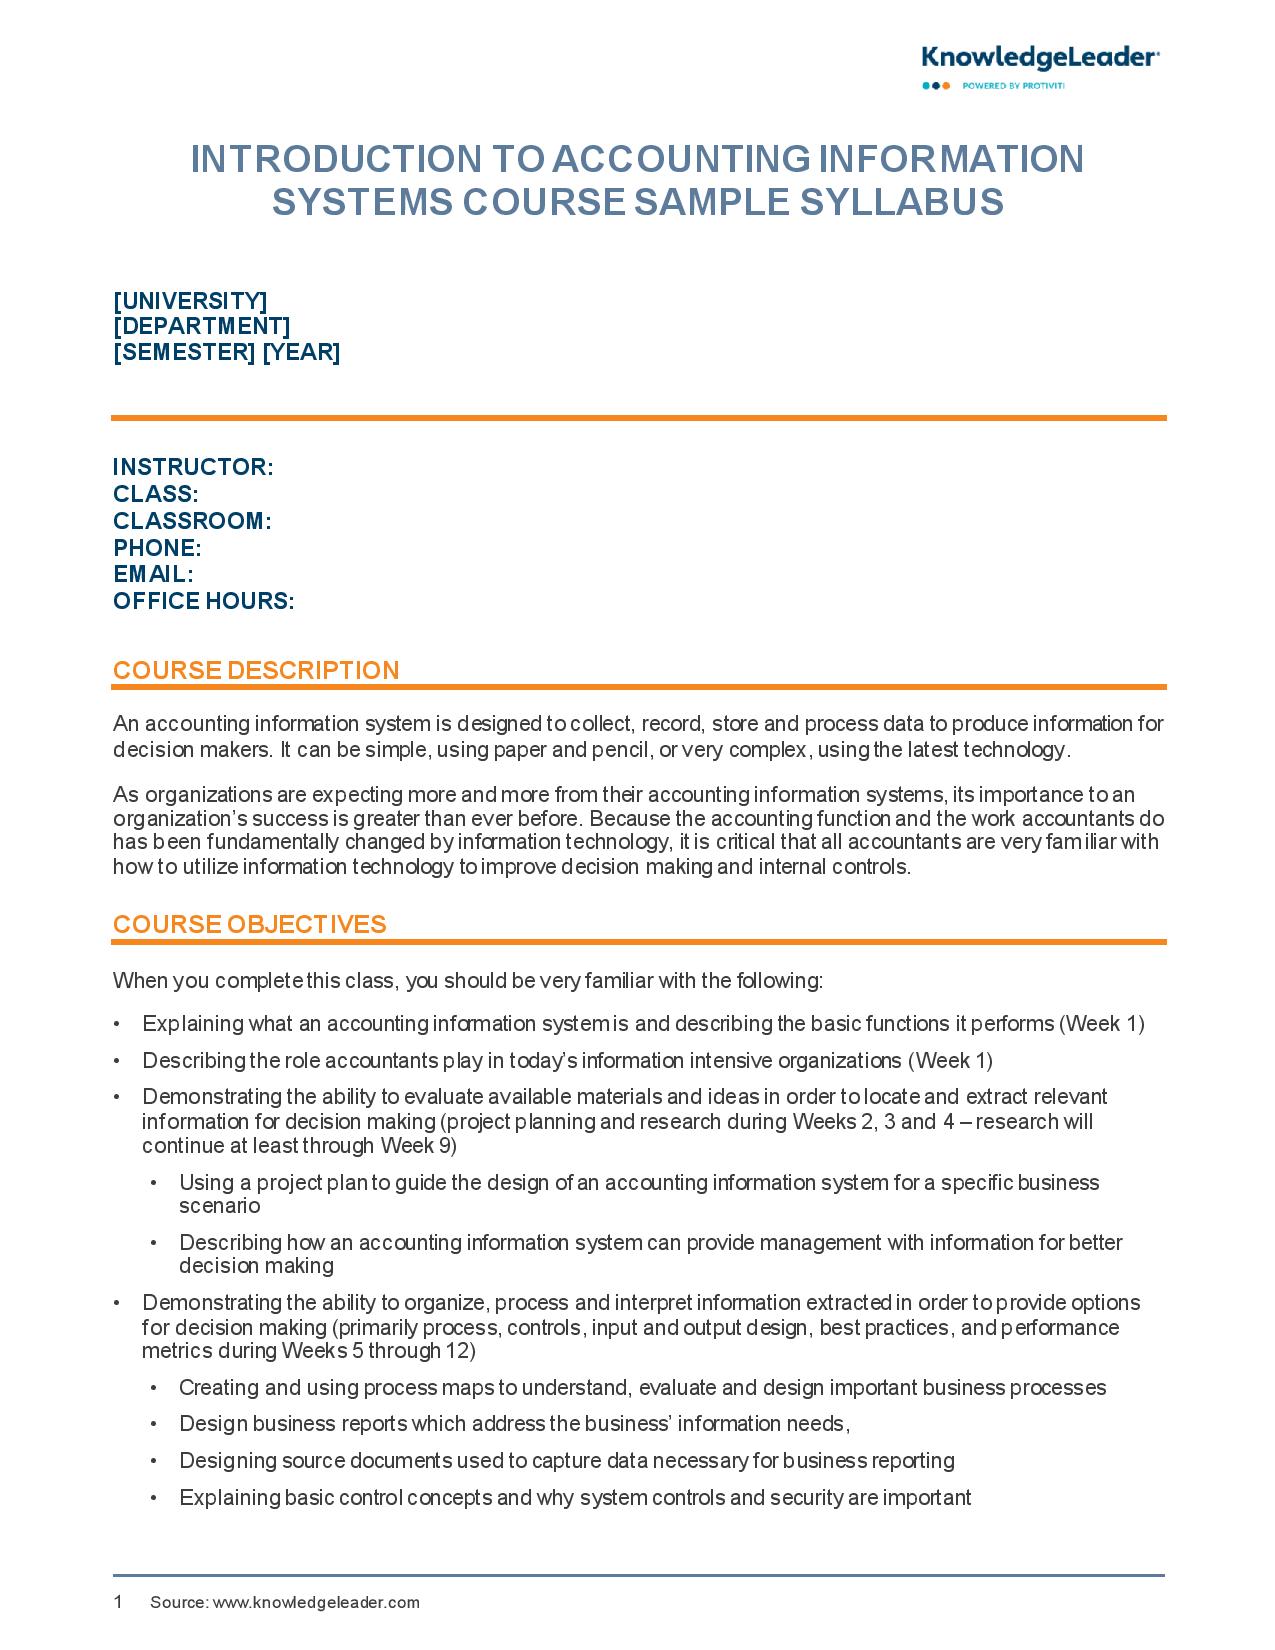 Screenshot of the first page of Introduction to Accounting Information Systems Course Sample Syllabus